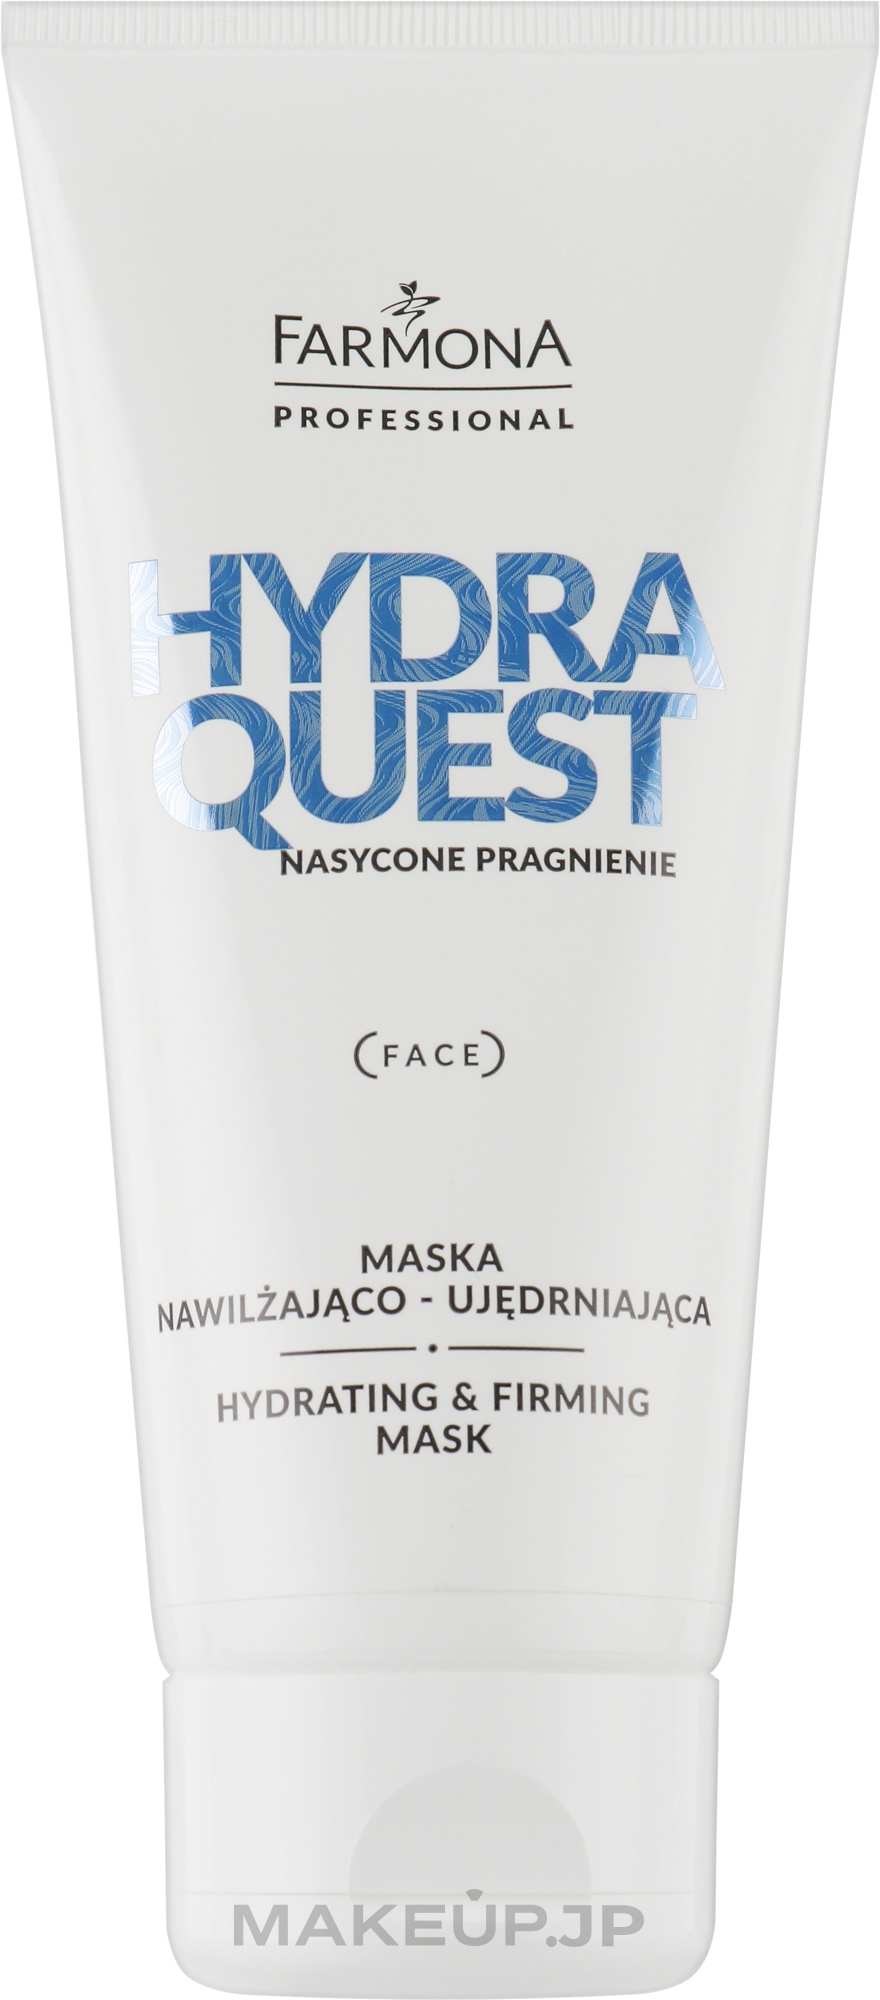 Hyaluronic Acid Moisturizing Face Mask - Farmona Hydro Quest Hydrating And Firming Mask — photo 200 ml